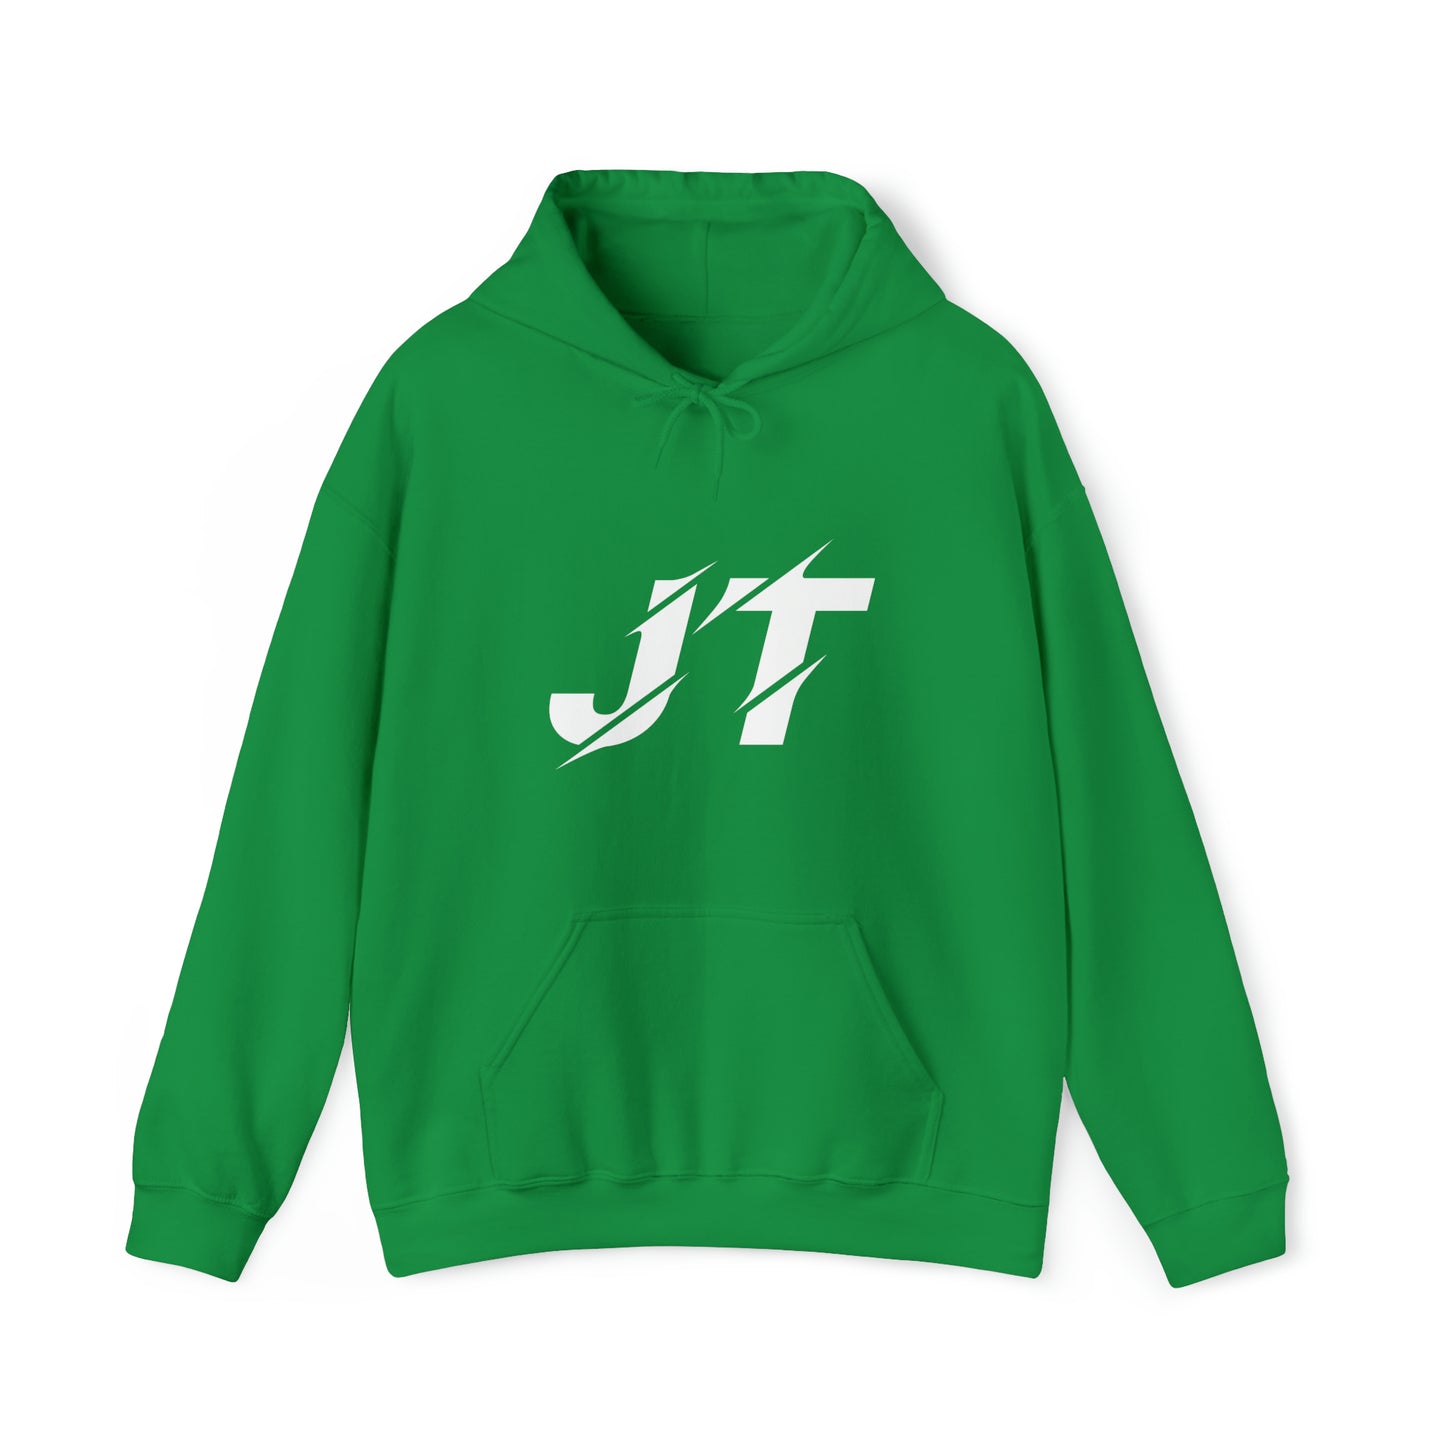 Jaire Tanner "JT" Double Sided Hoodie